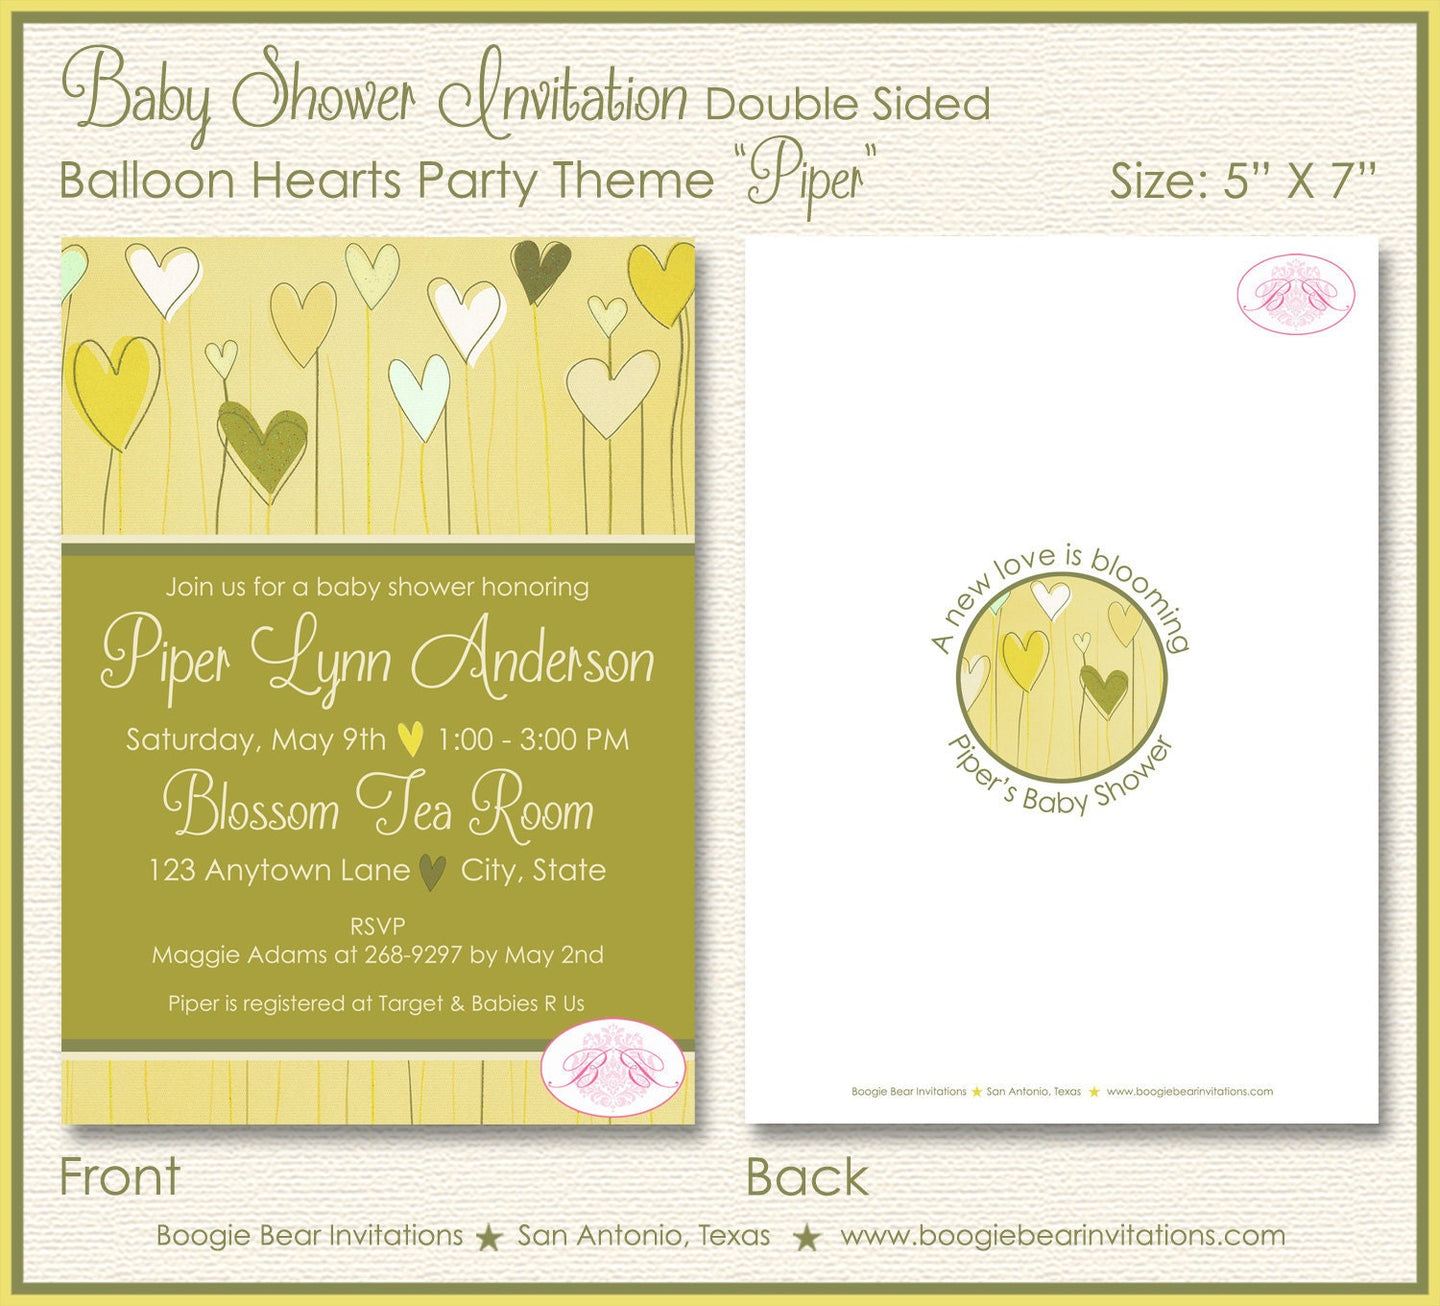 Balloon Hearts Baby Shower Invitation Party Valentine's Day Love Boy Girl Boogie Bear Invitations Piper Theme Paperless Printable Printed